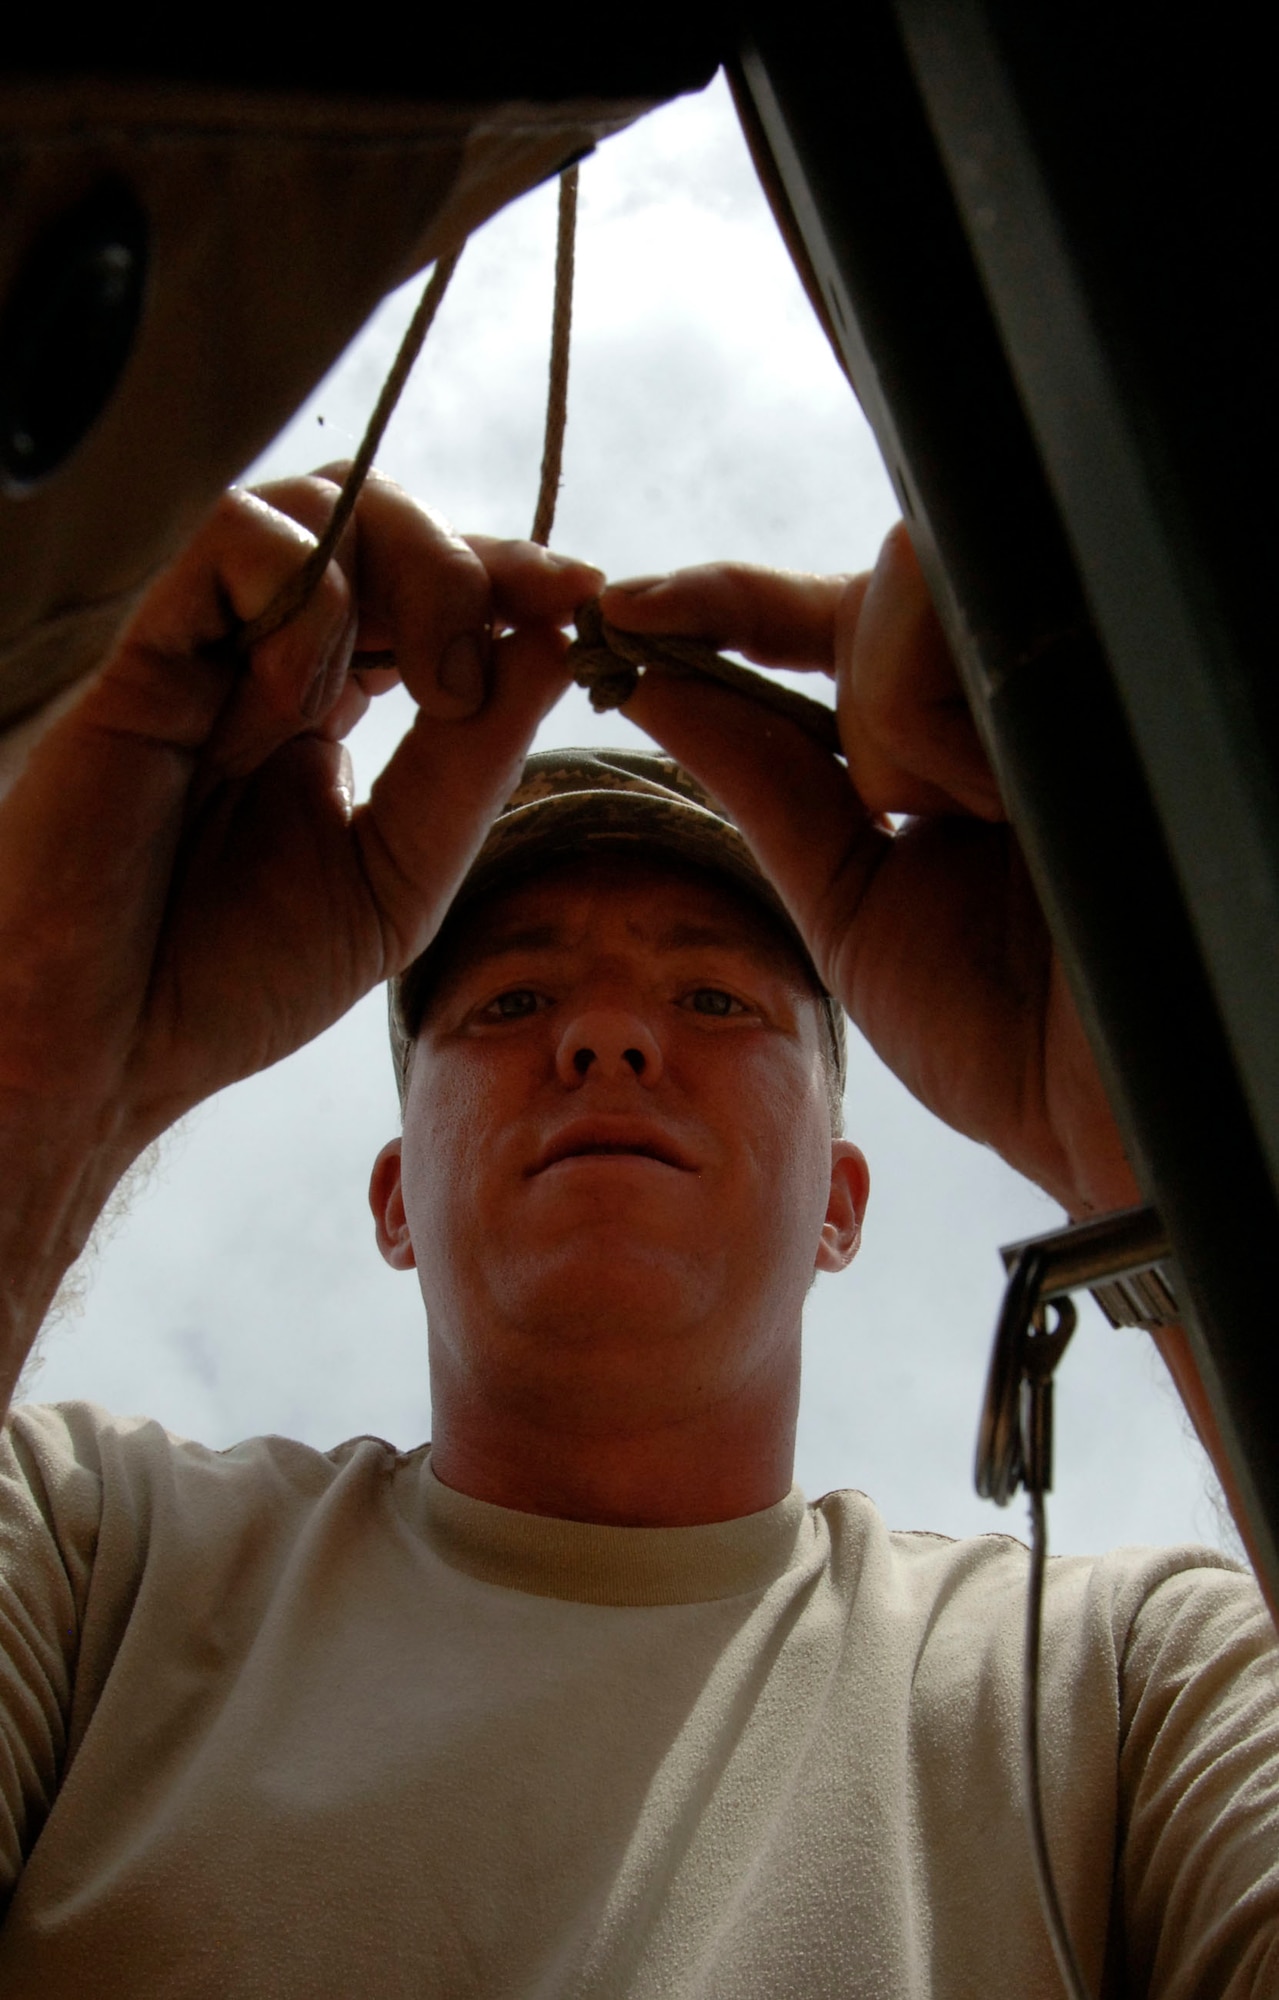 Tech. Sgt. Dave Gibbs, 49th Materiel Maintenance Group, laces together the roof of the dining tent at the temporary encampment that will house more than 250 Airmen, Soldiers, and Marines for New Horizons Panama 2010. (U.S. Air Force photo/Tech. Sgt. Eric Petosky)